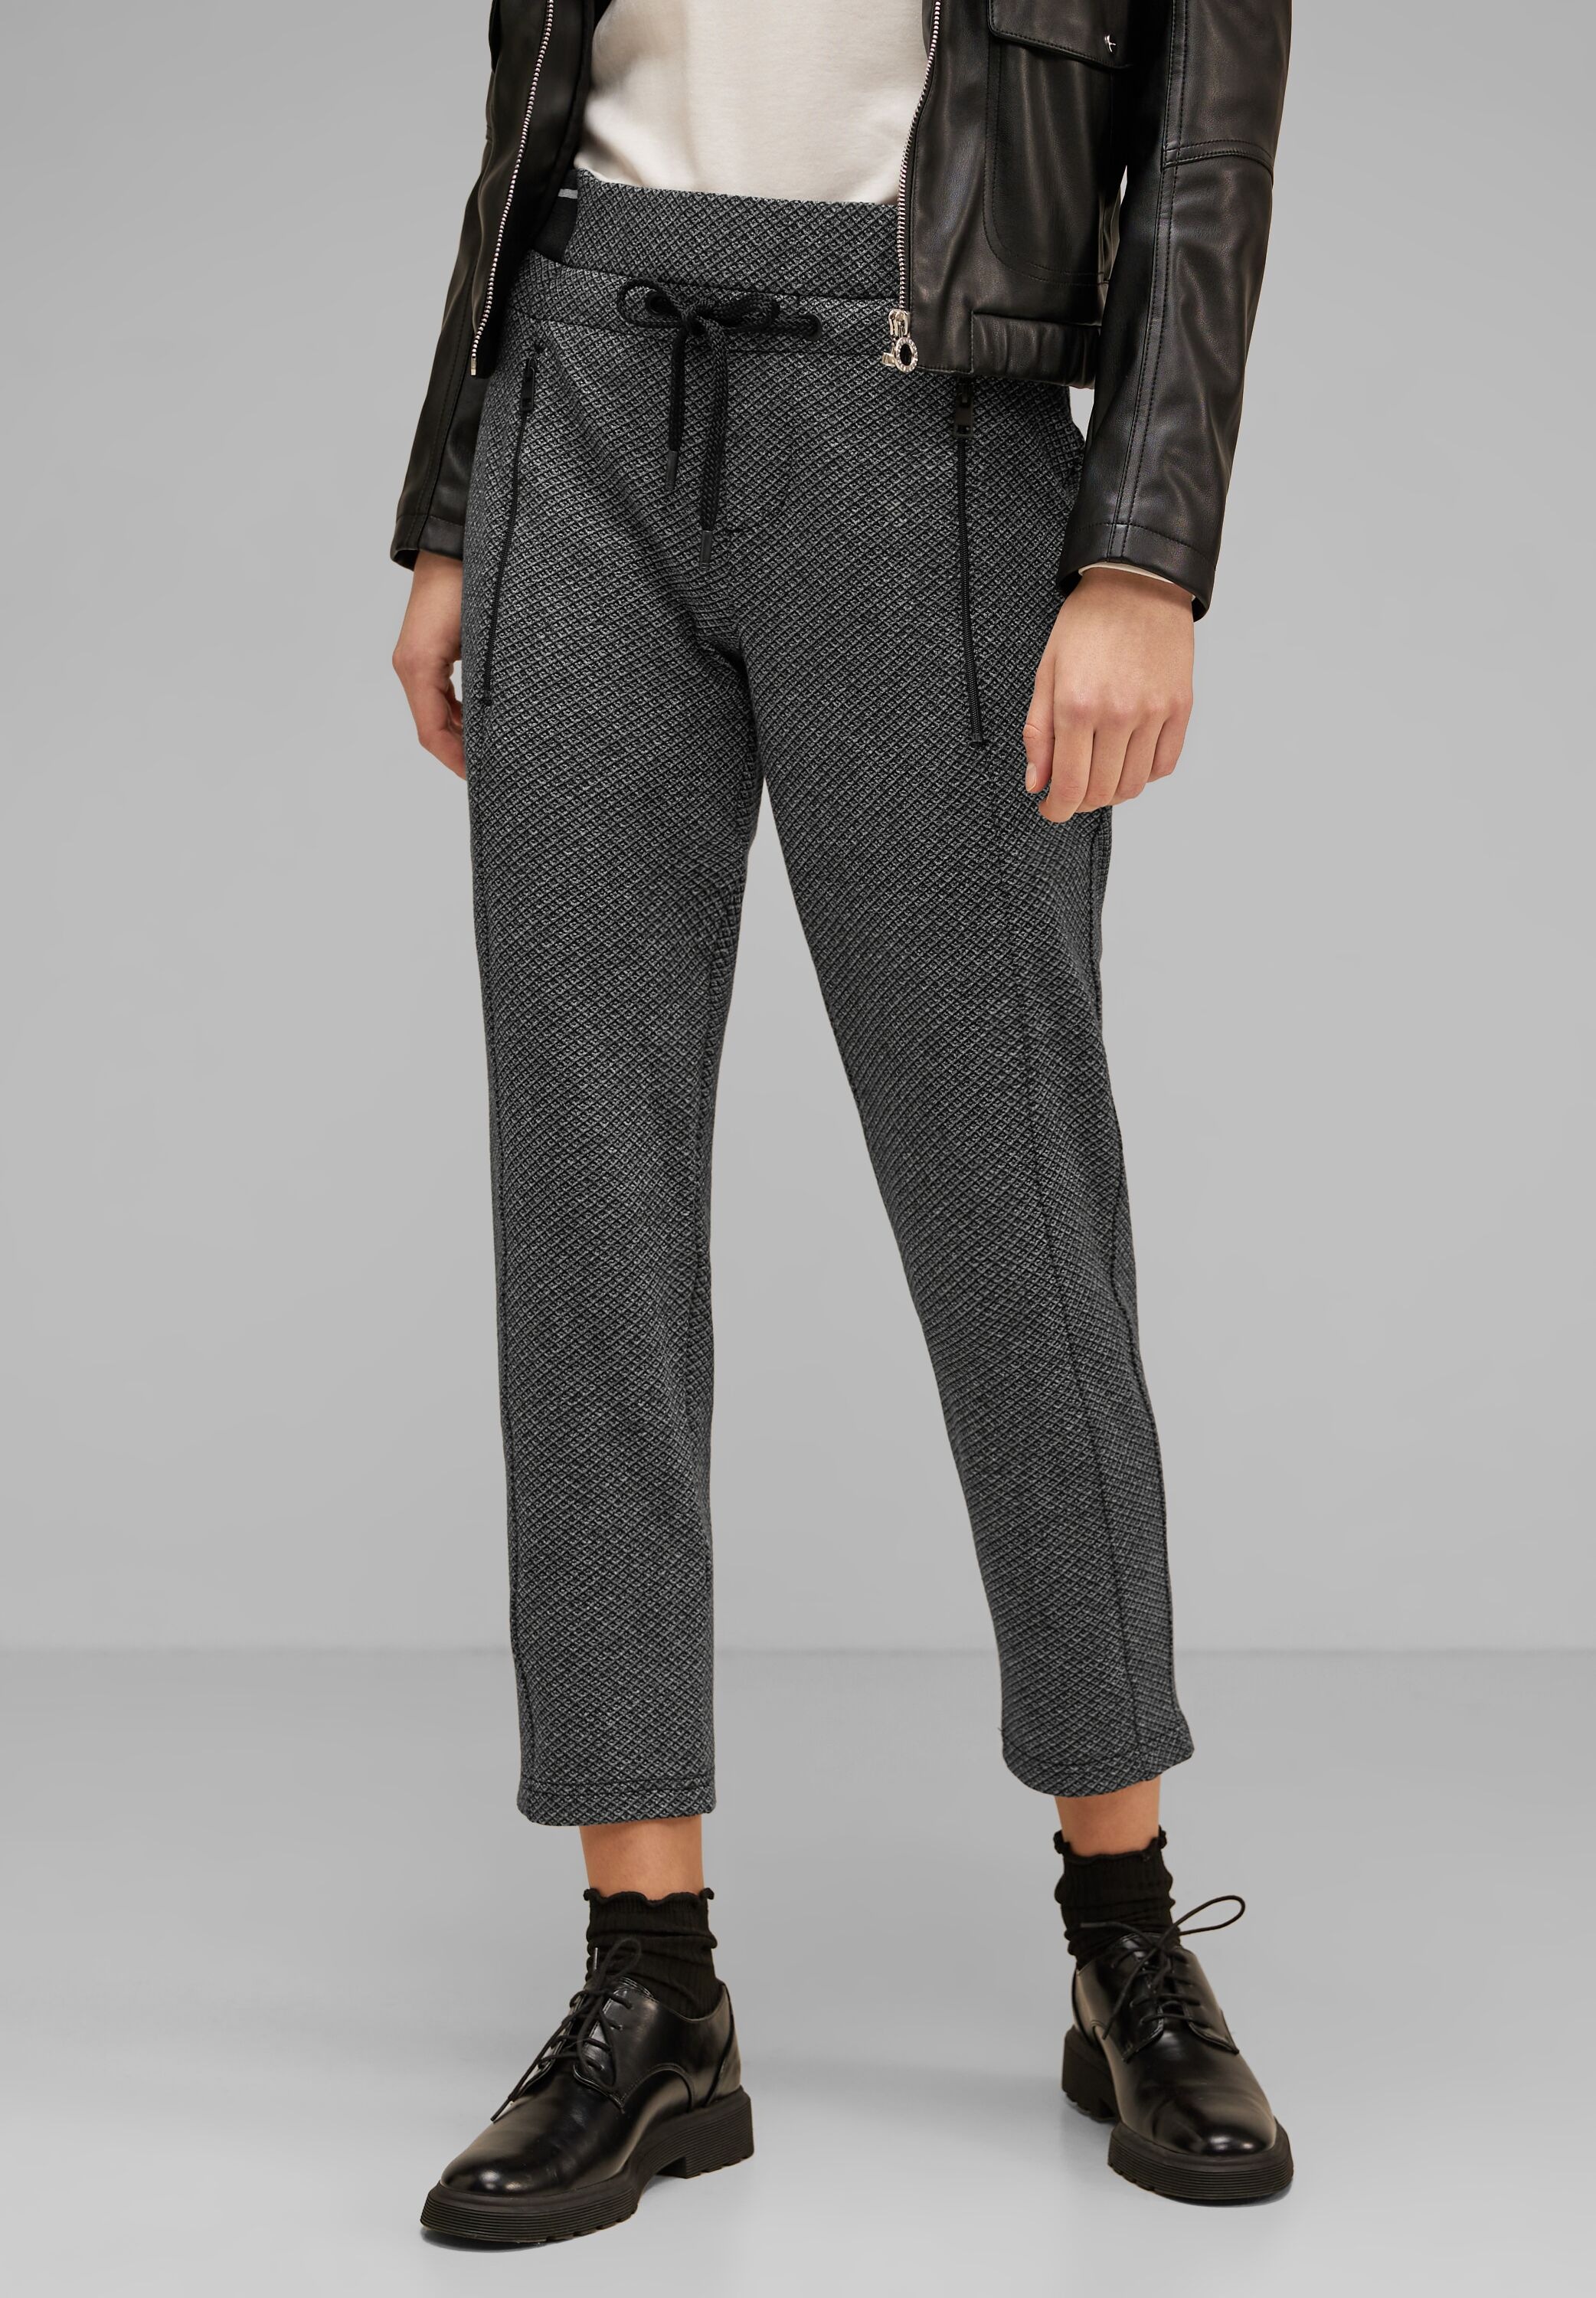 STREET ONE Jogger Pants, Middle Waist